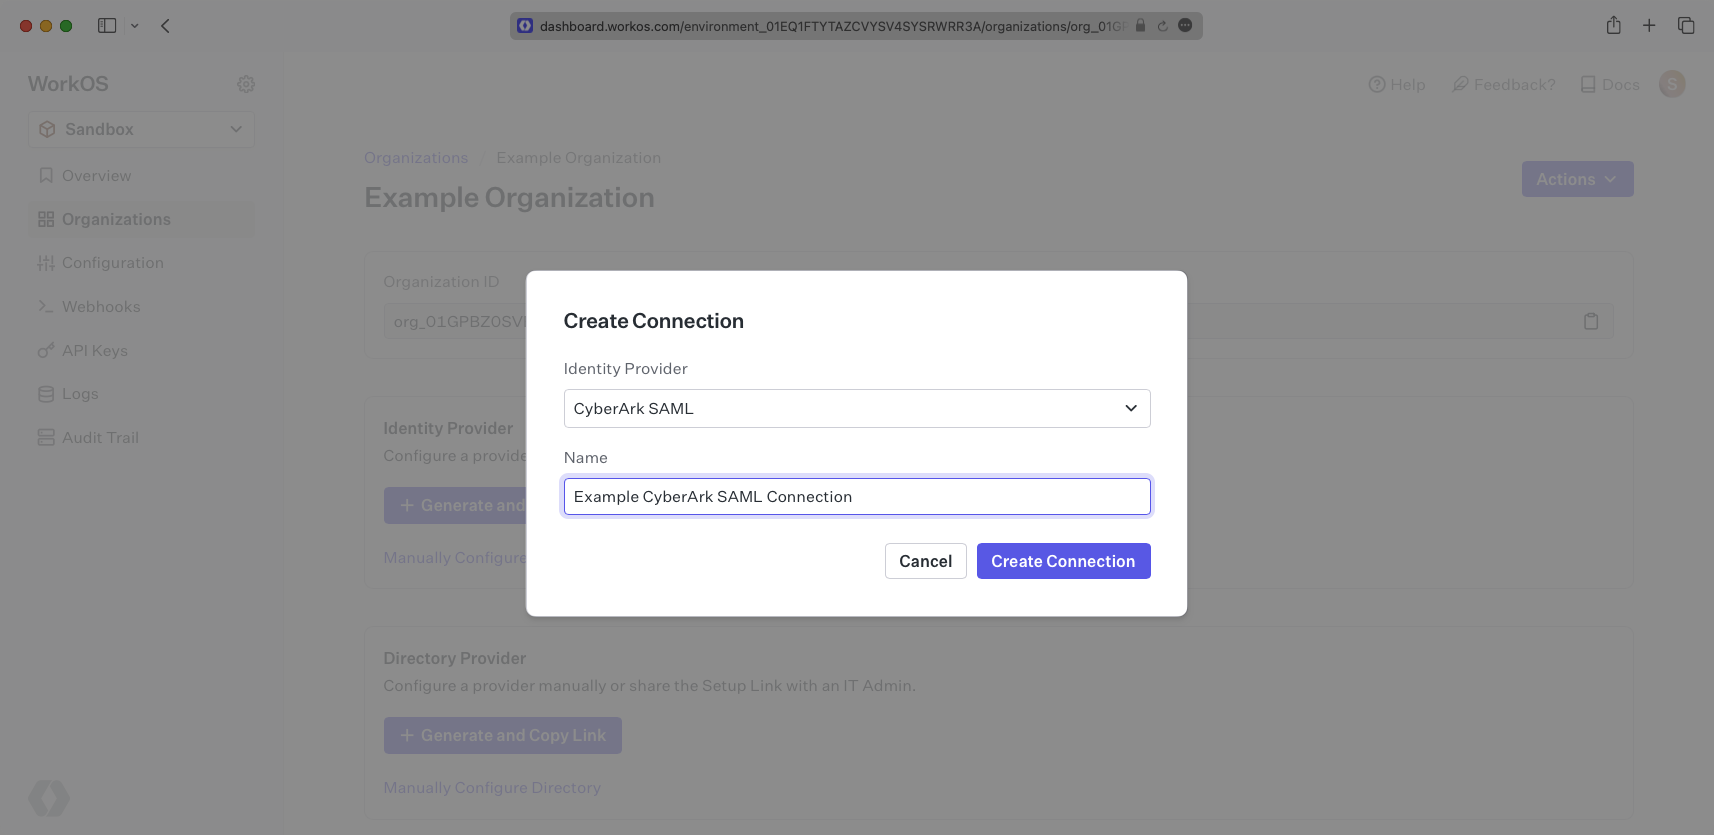 A screenshot showing the "Create Connection" modal in the WorkOS dashboard.